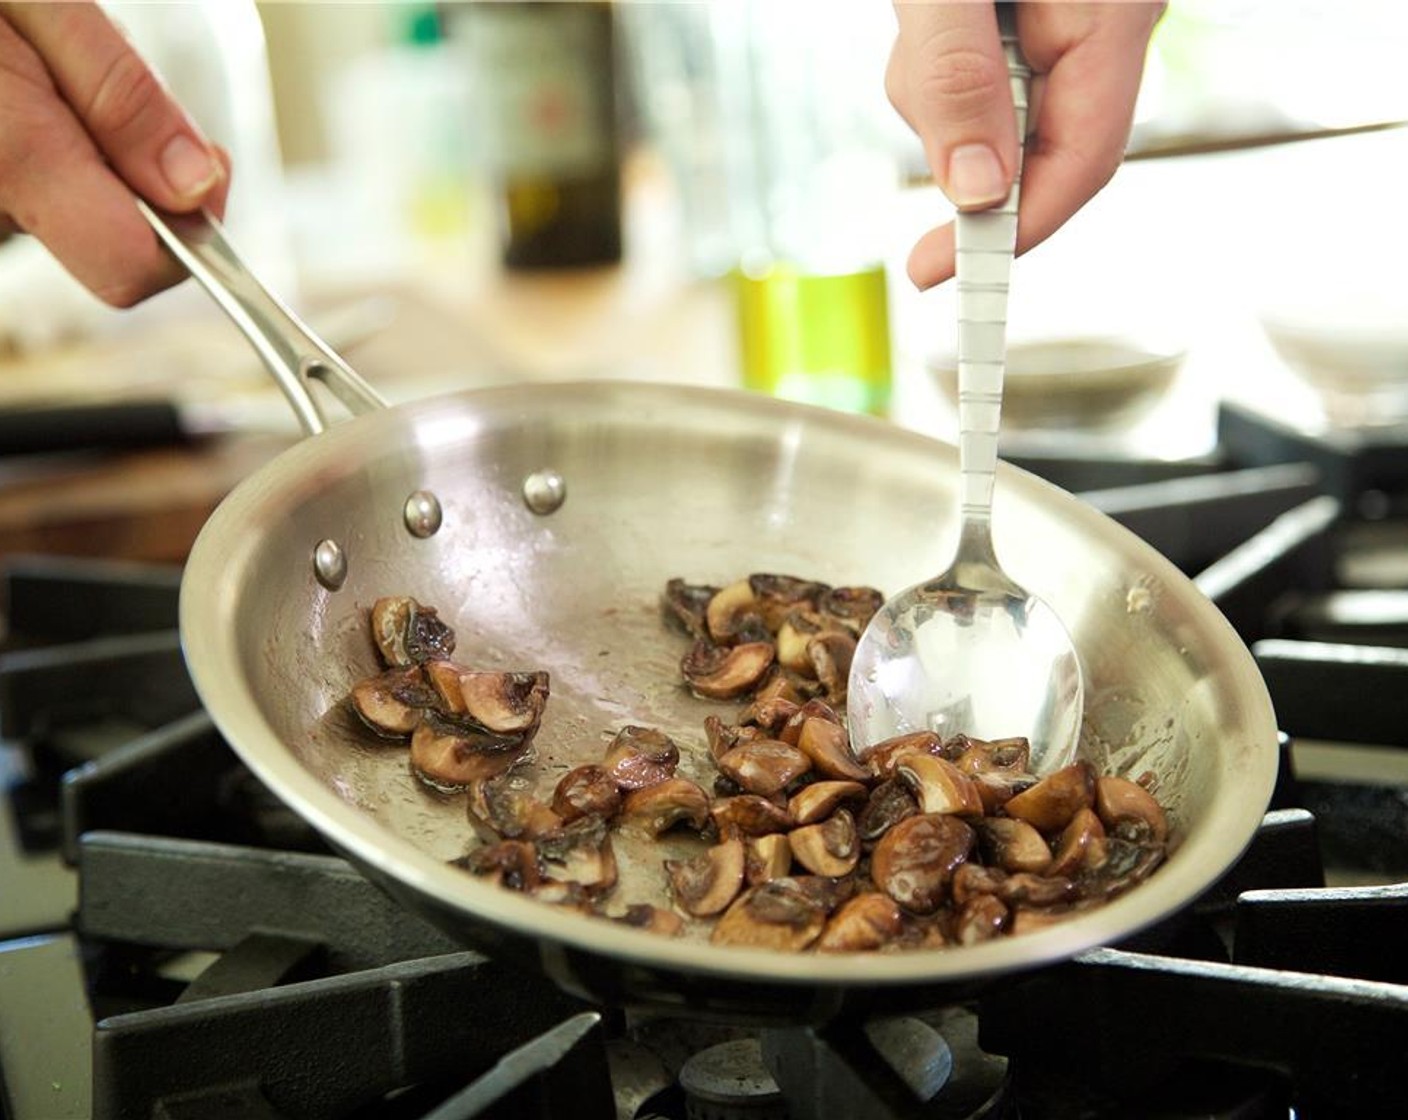 step 9 Heat a small saute pan over medium heat with Olive Oil (1 tsp). Add mushrooms to pan and cook until tender, about two minutes.